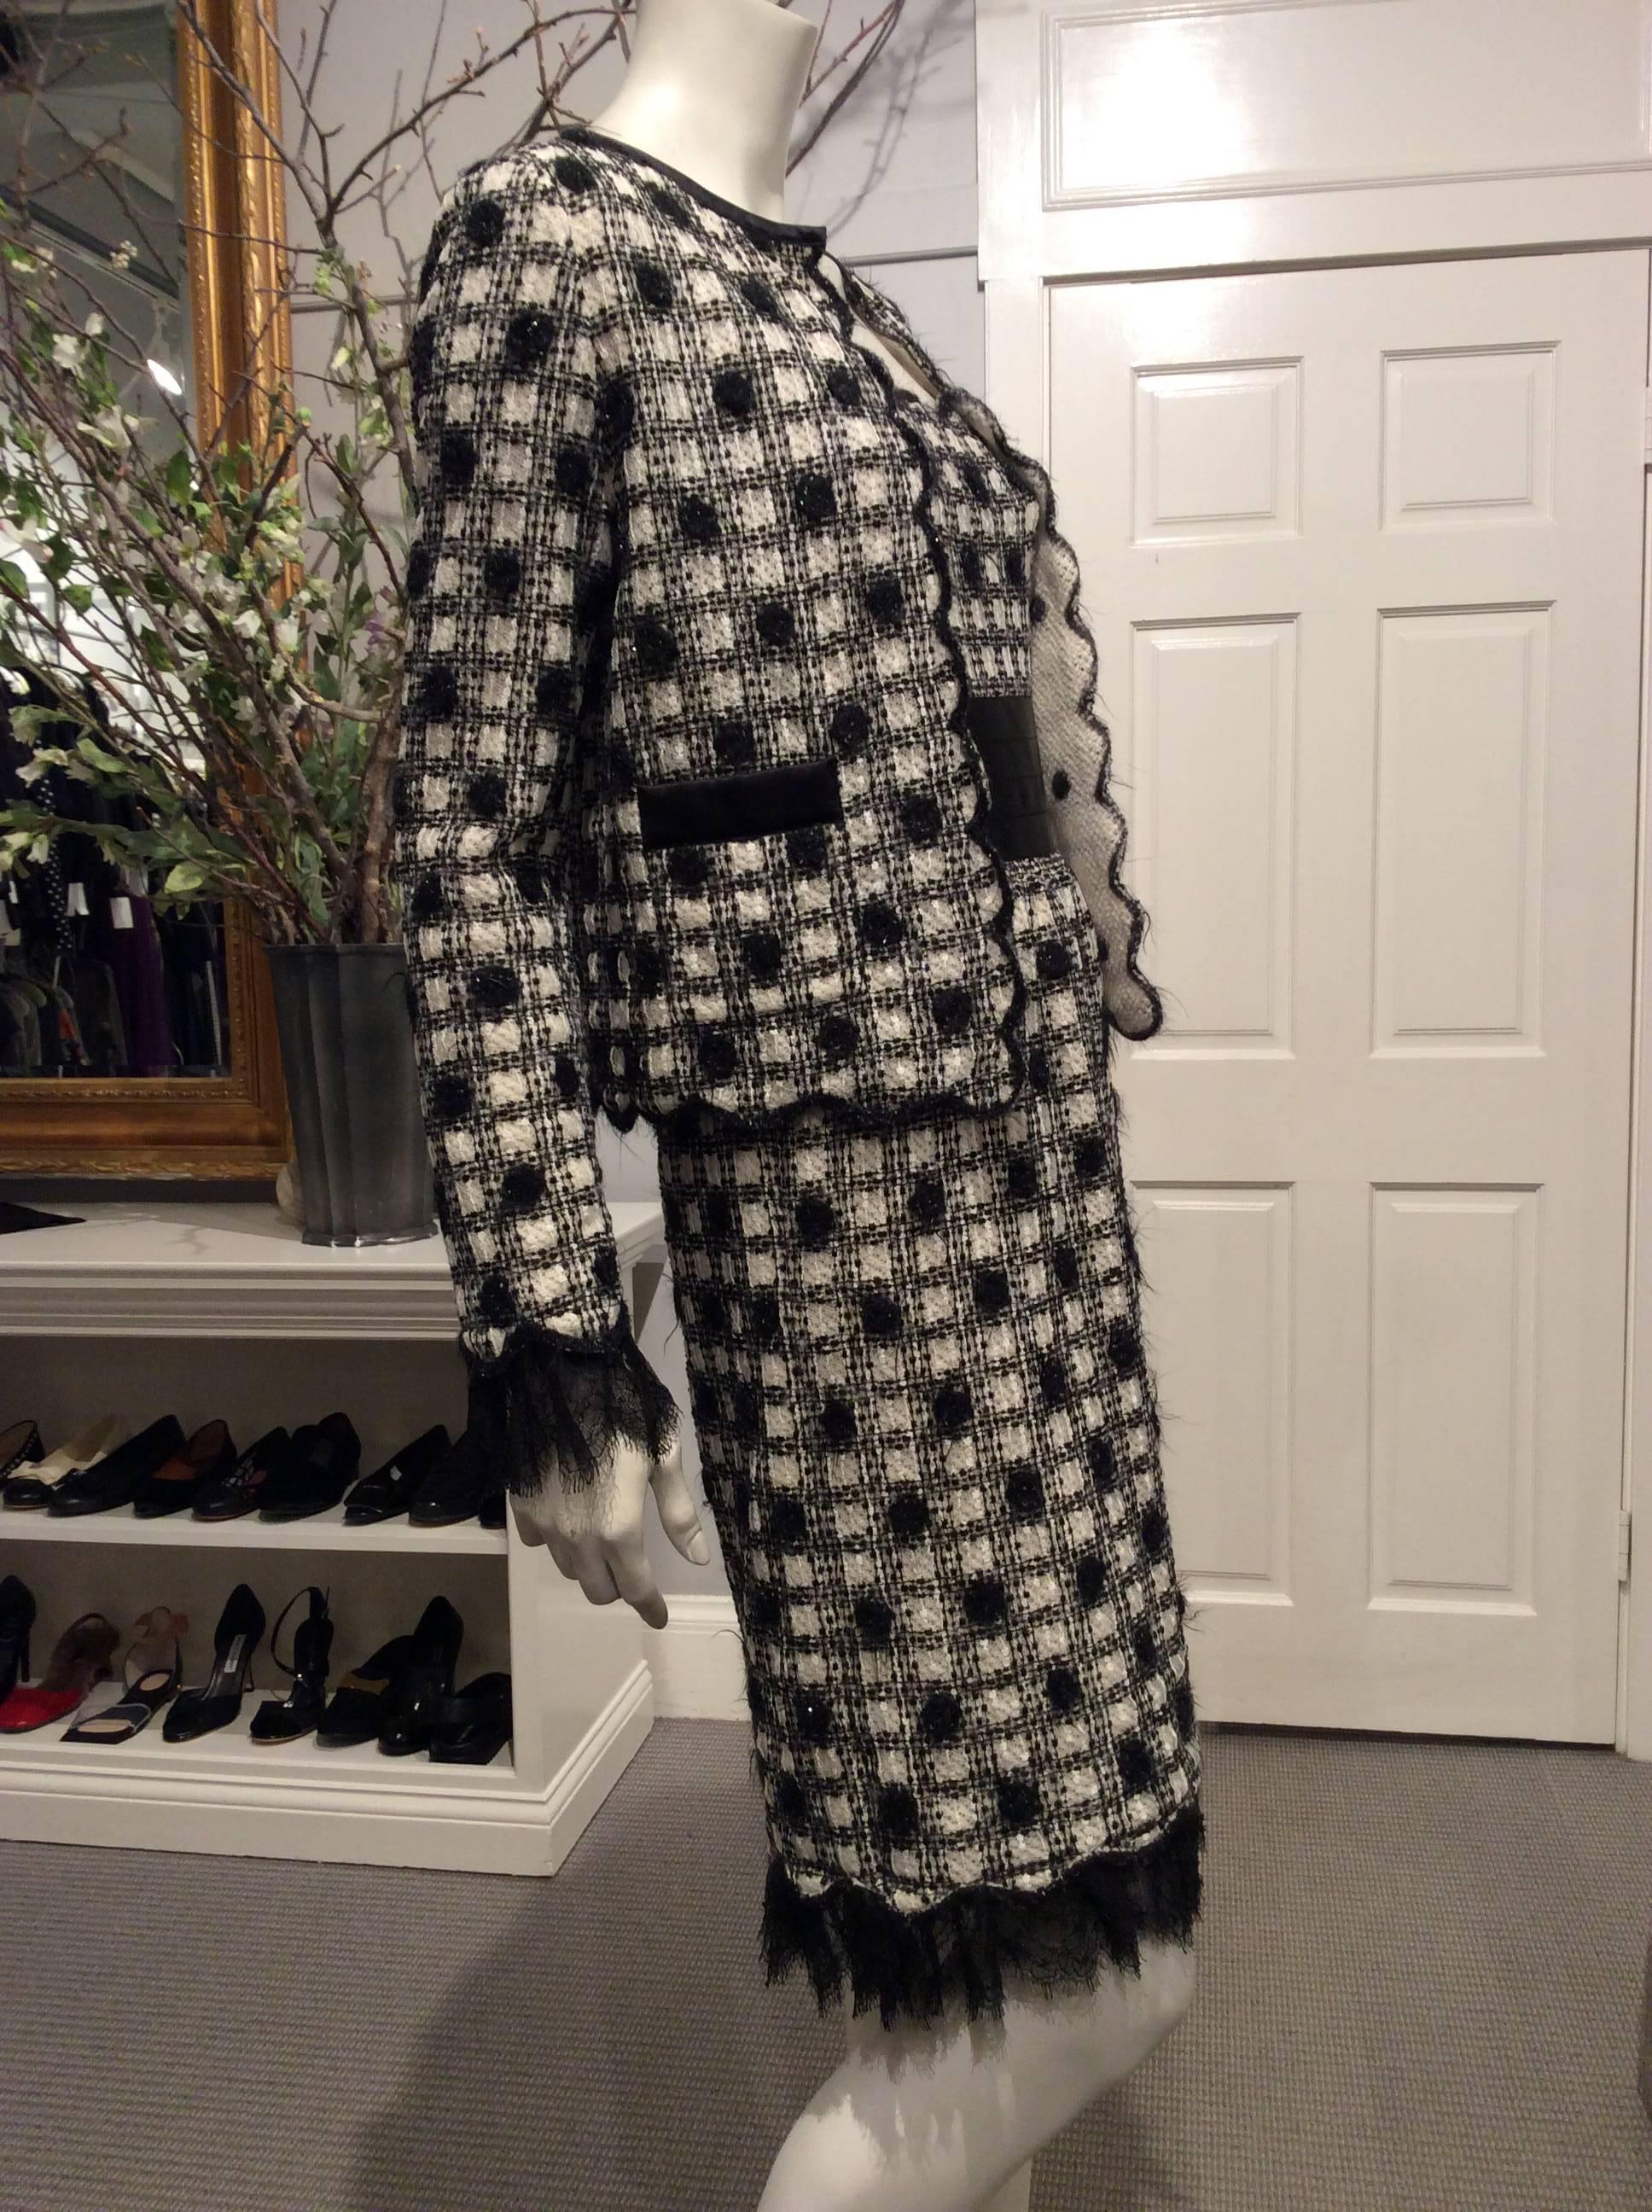 An off white cashmere knitted layer is covered by black and white checkered lace with black mohair polka dots. This dress has a satin mock cummerbund with two small pewter jeweled CC on the side. The skirt is slightly gathered at the waist. The